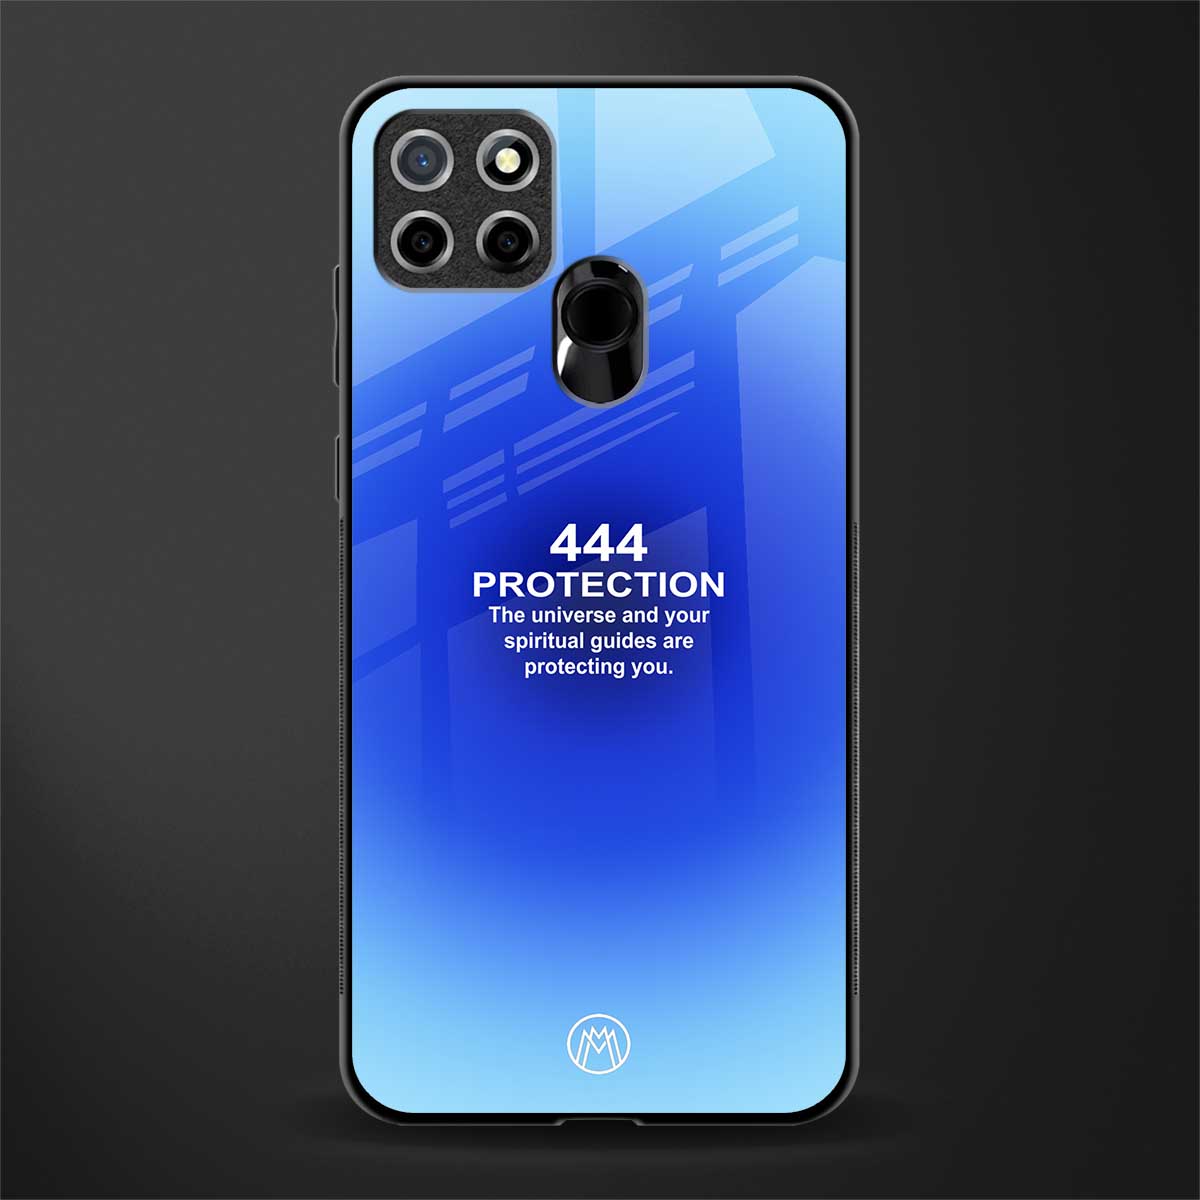 444 protection glass case for realme narzo 20 image